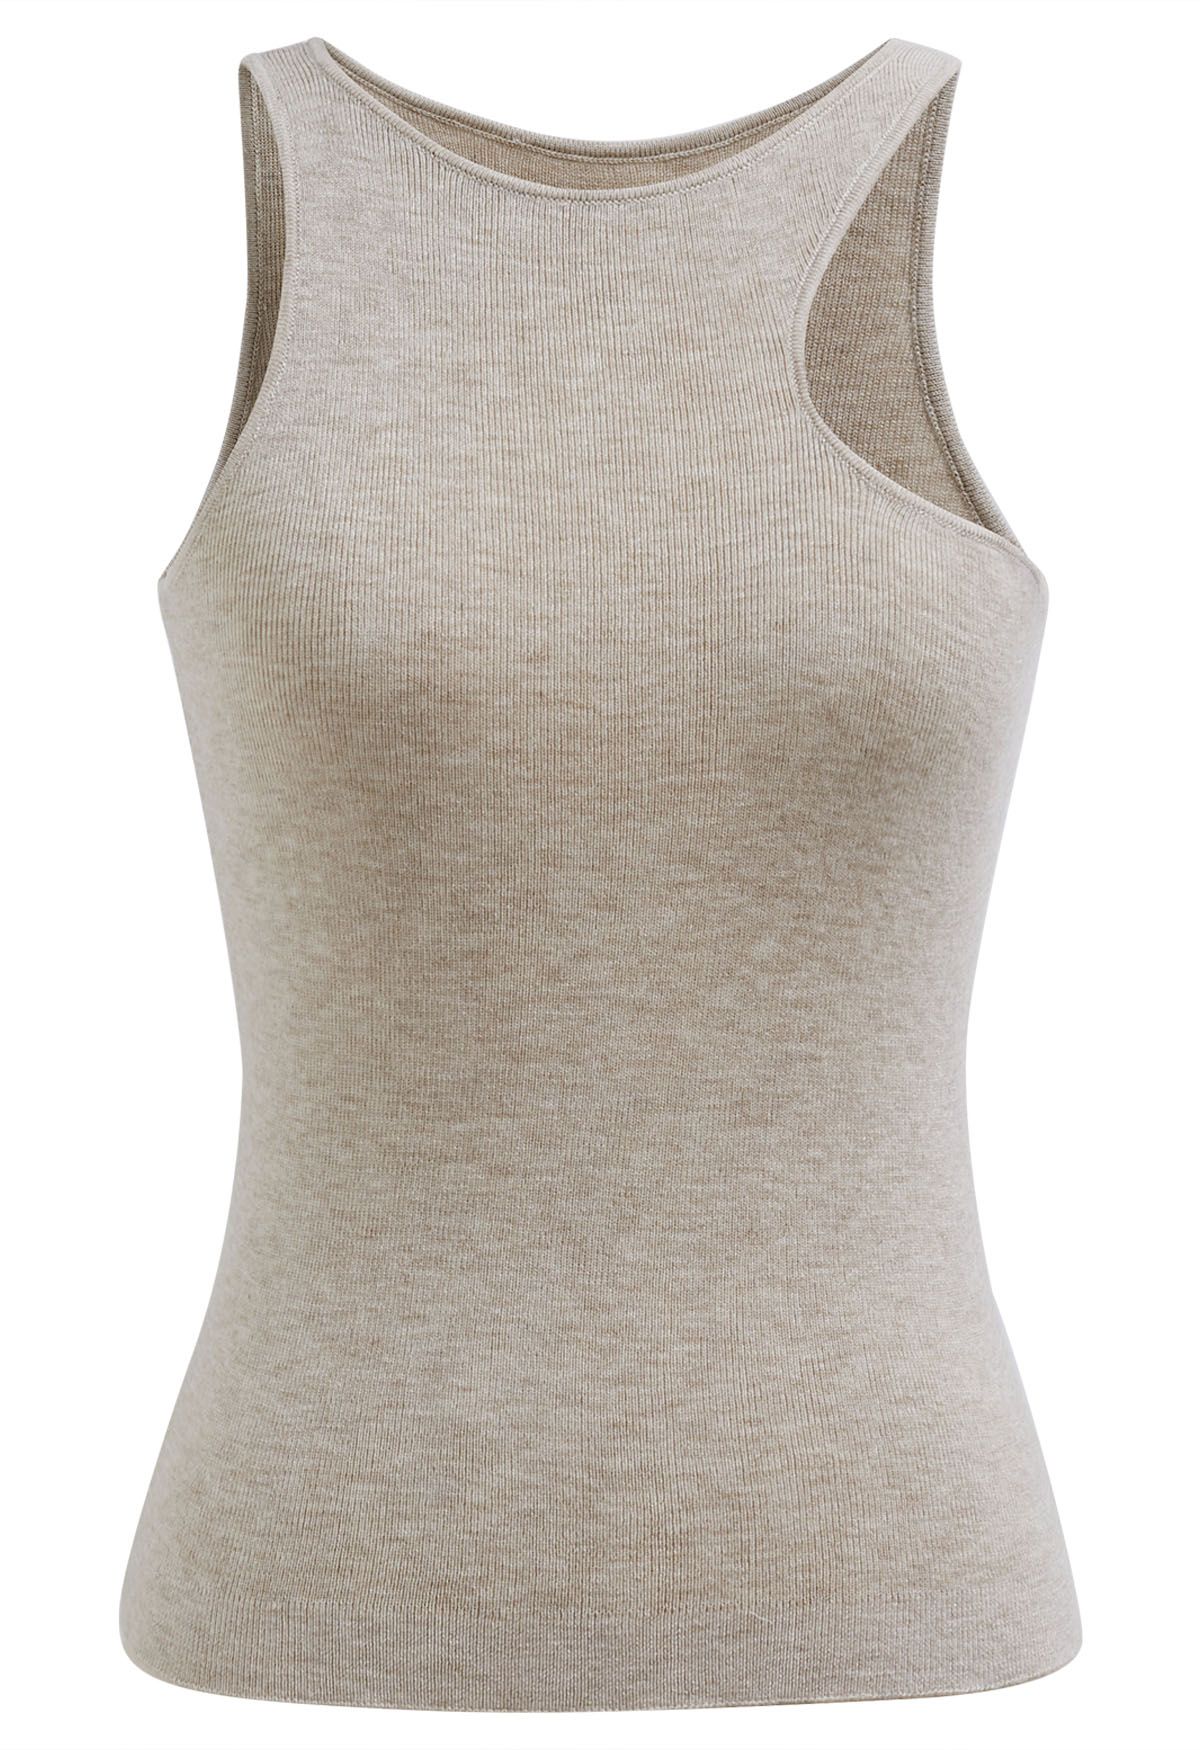 Chic Impression Knit Tank Top in Oatmeal - Retro, Indie and Unique Fashion